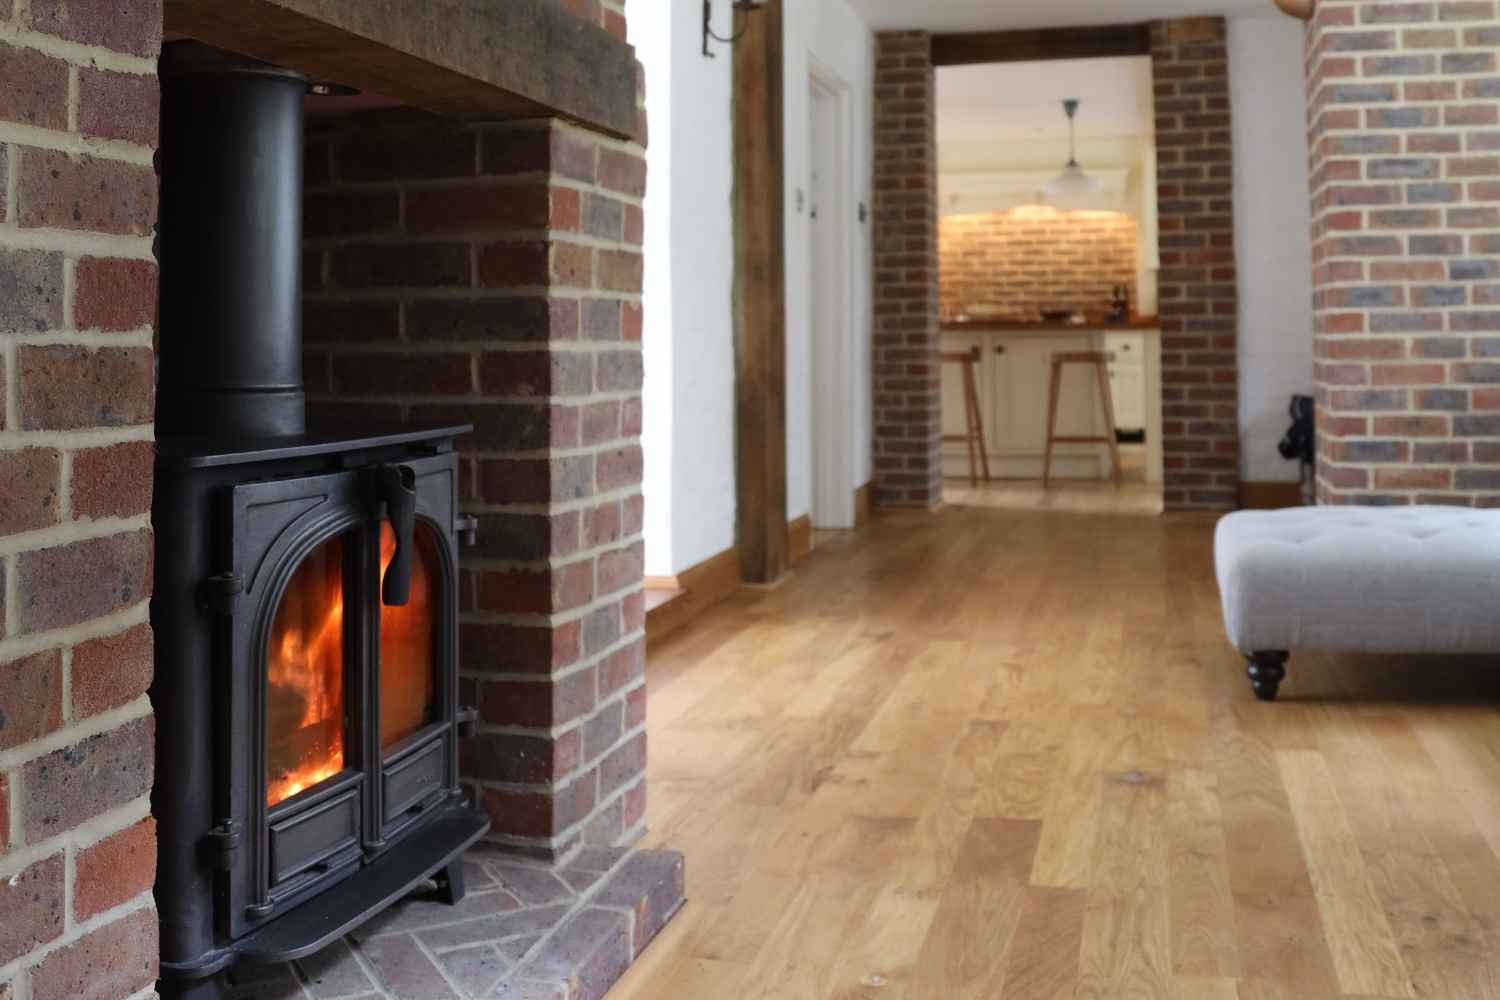 A woodburner keeps the family room toasty